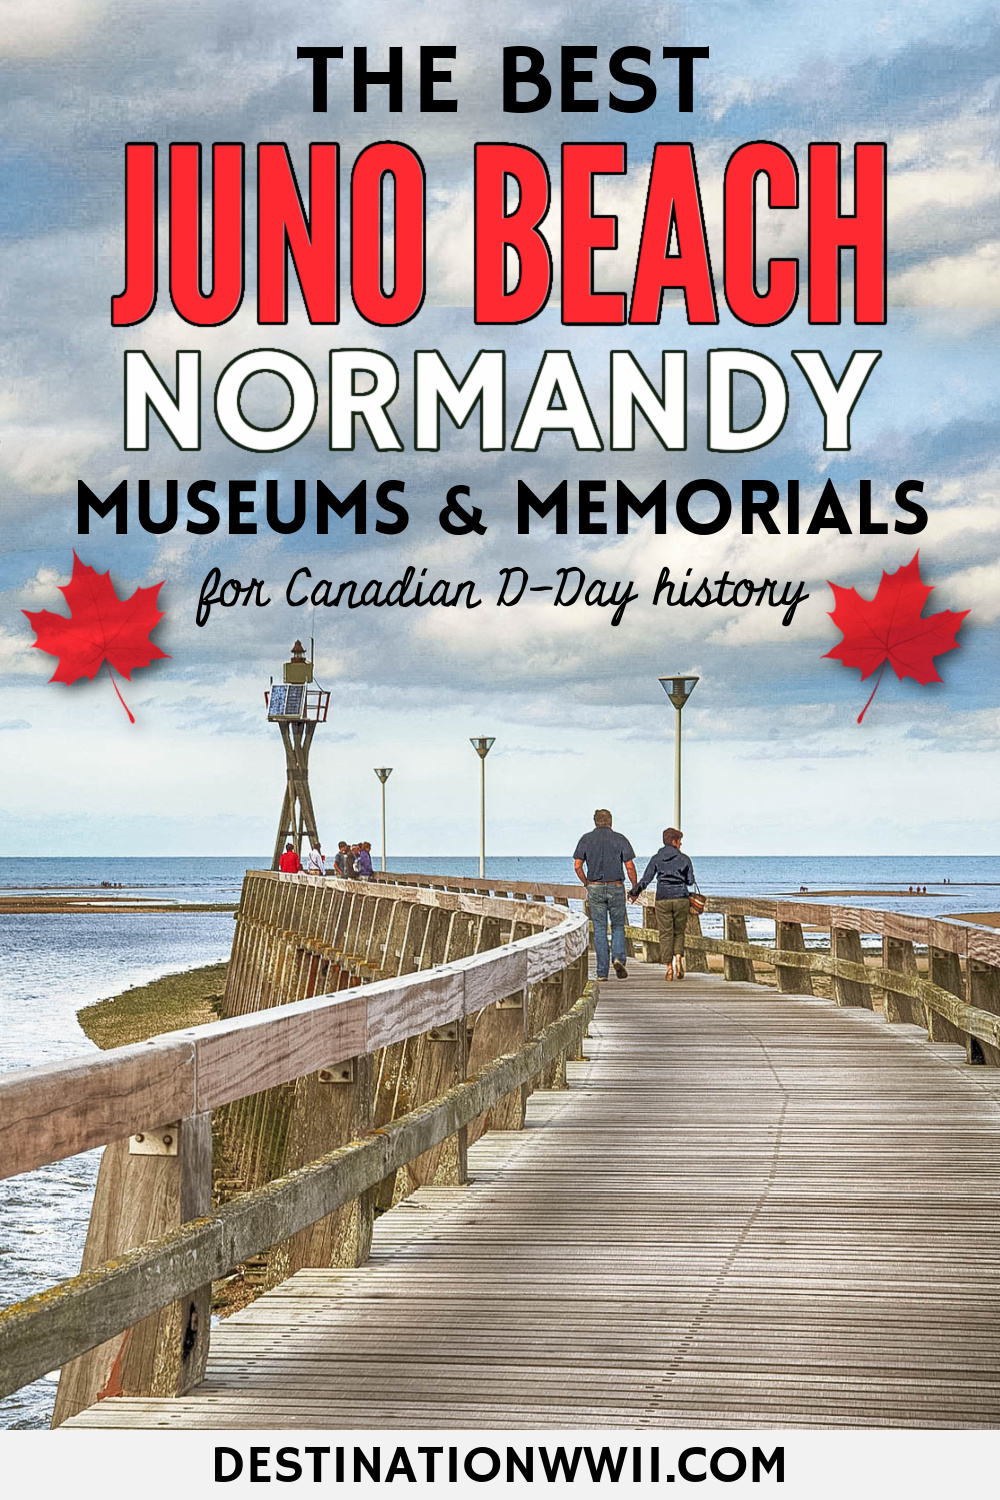 Visiting Juno Beach Normandy, Museums and Memorials to Visit to explore Canada's D-Day history